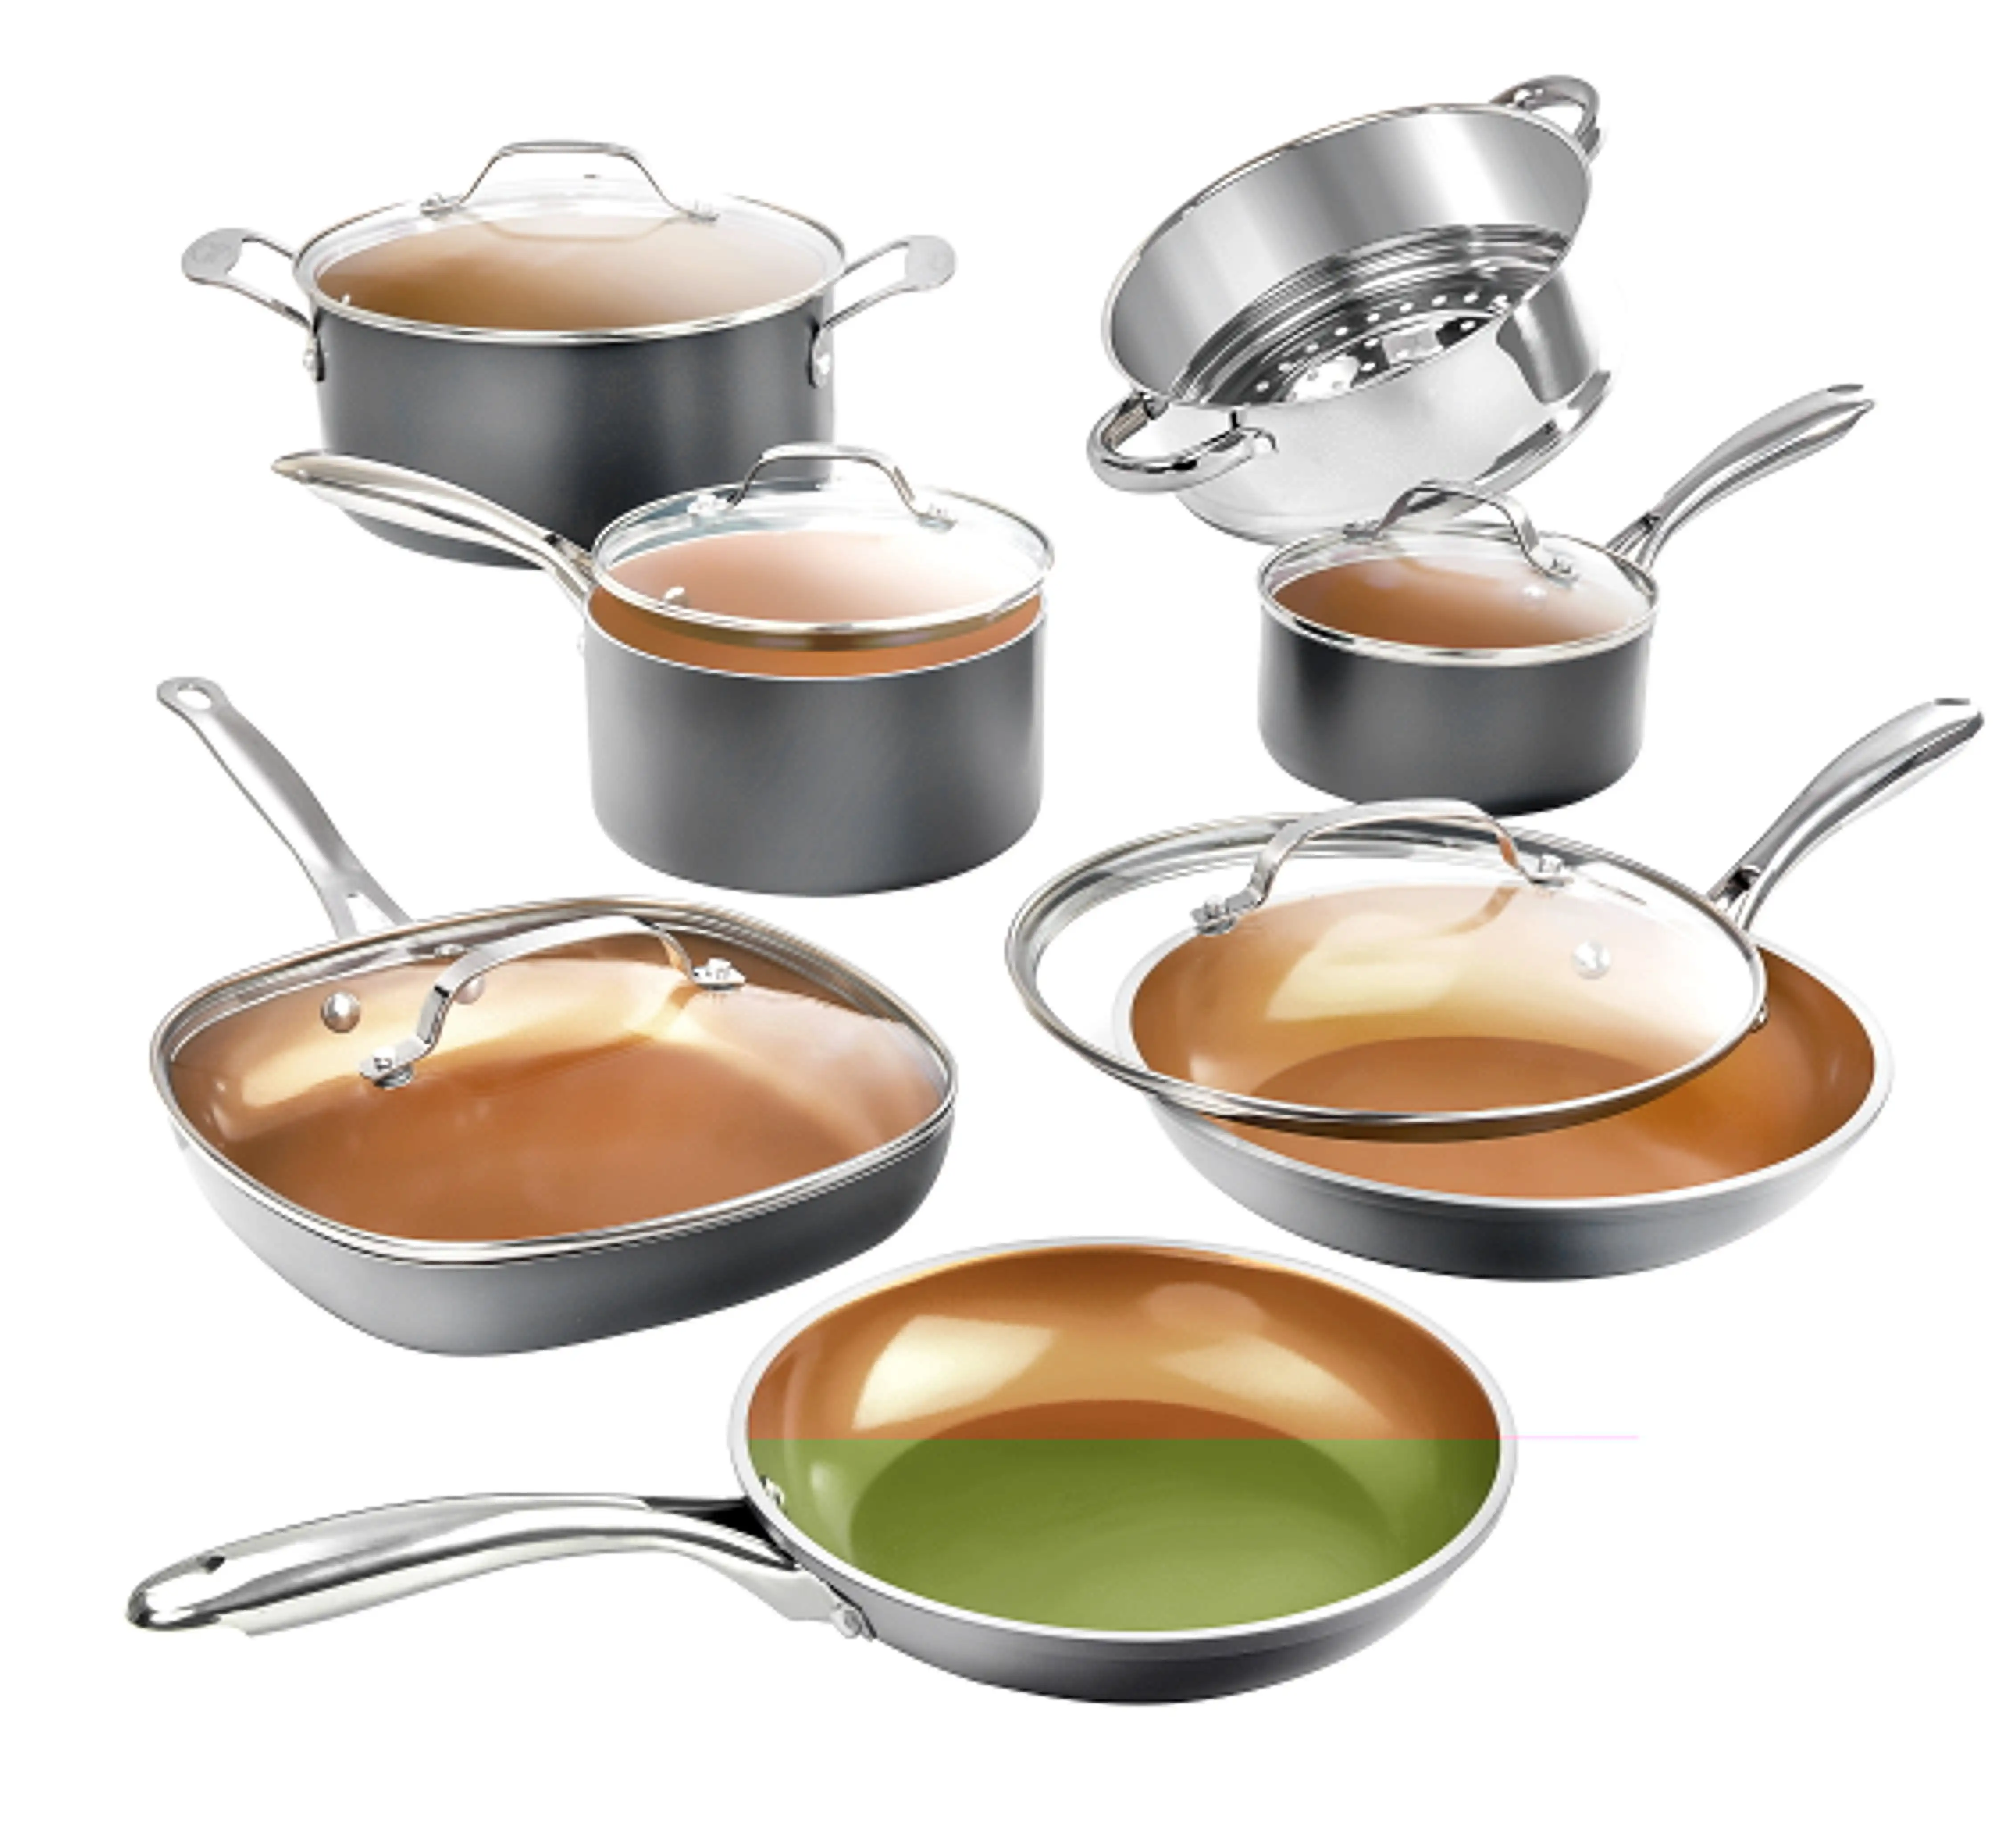 

Steel Diamond Pots and Pans Set Nonstick Cookware Set Includes Skillets Fry Pans Stock Pots, Dishwasher and Oven Safe12 Pcs